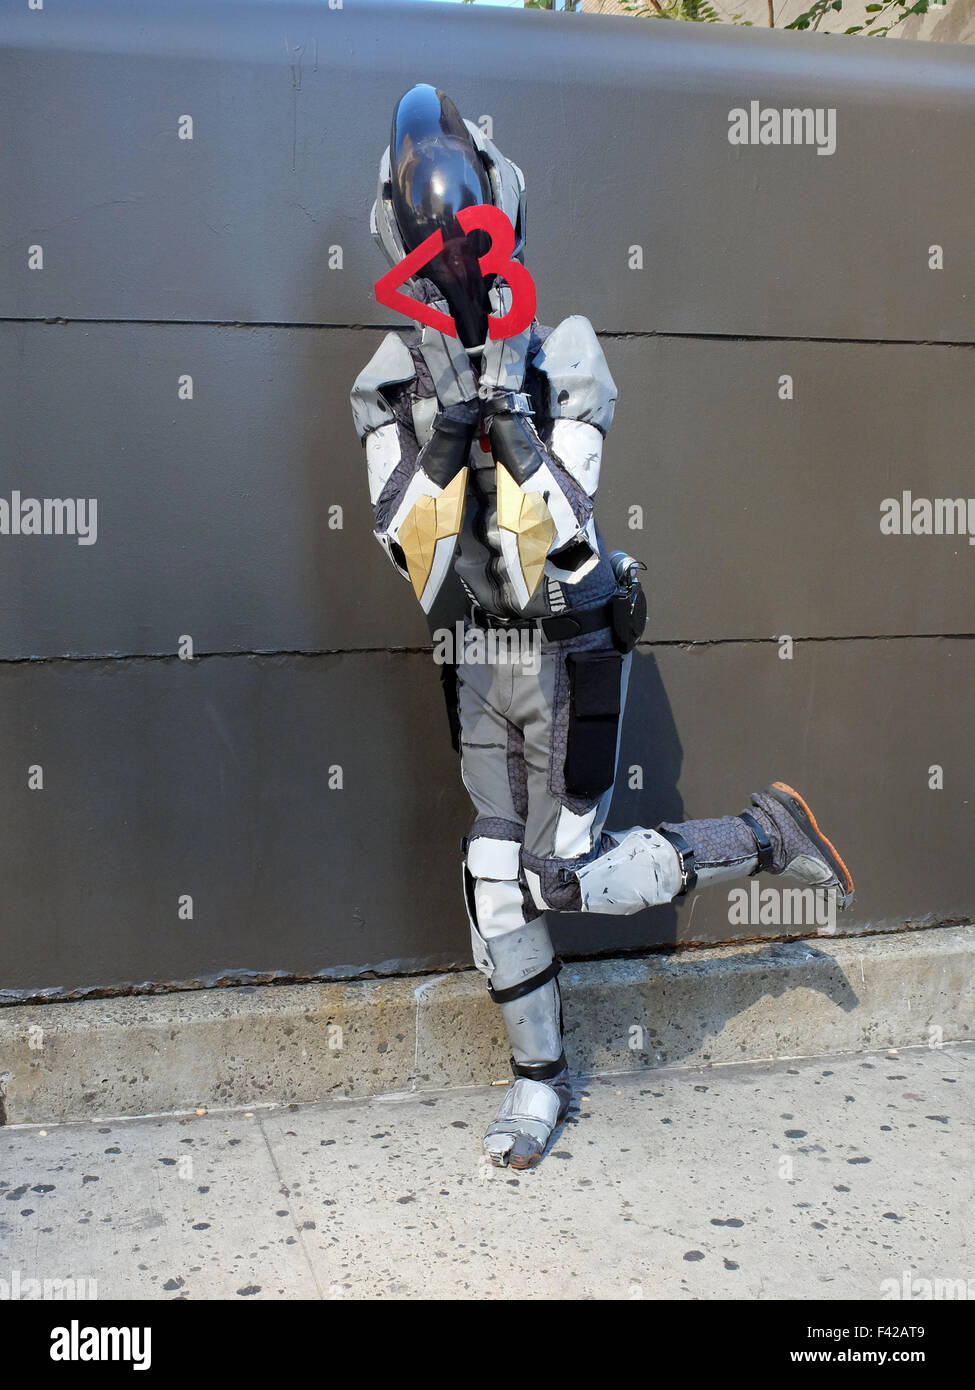 An attendee of New York Comic Con 2015 dresses as Zero the Assassin from the video game Borderlands 2. Stock Photo